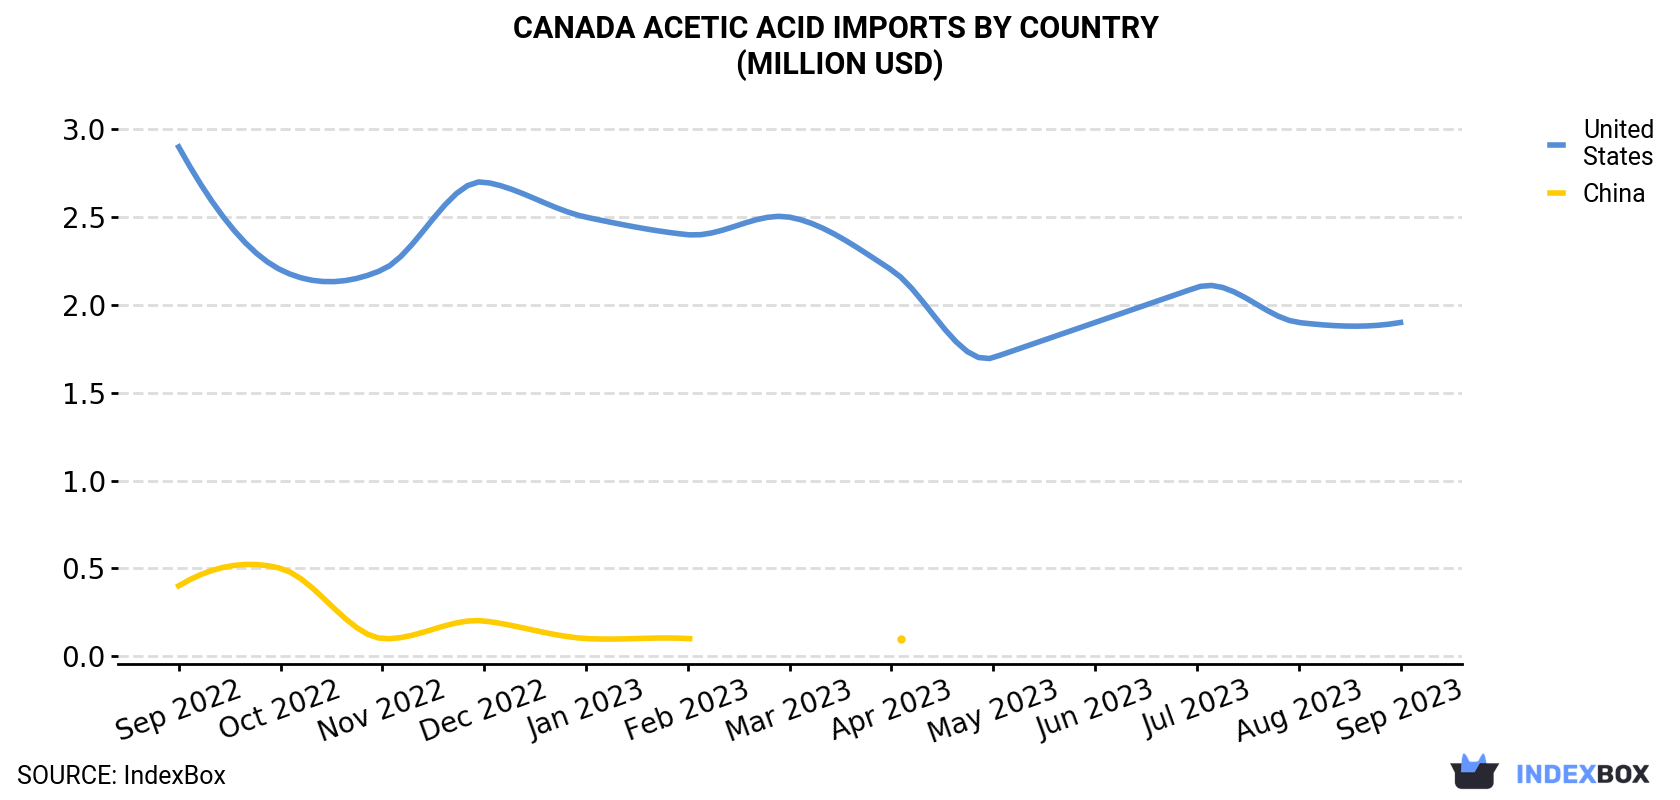 Canada Acetic Acid Imports By Country (Million USD)